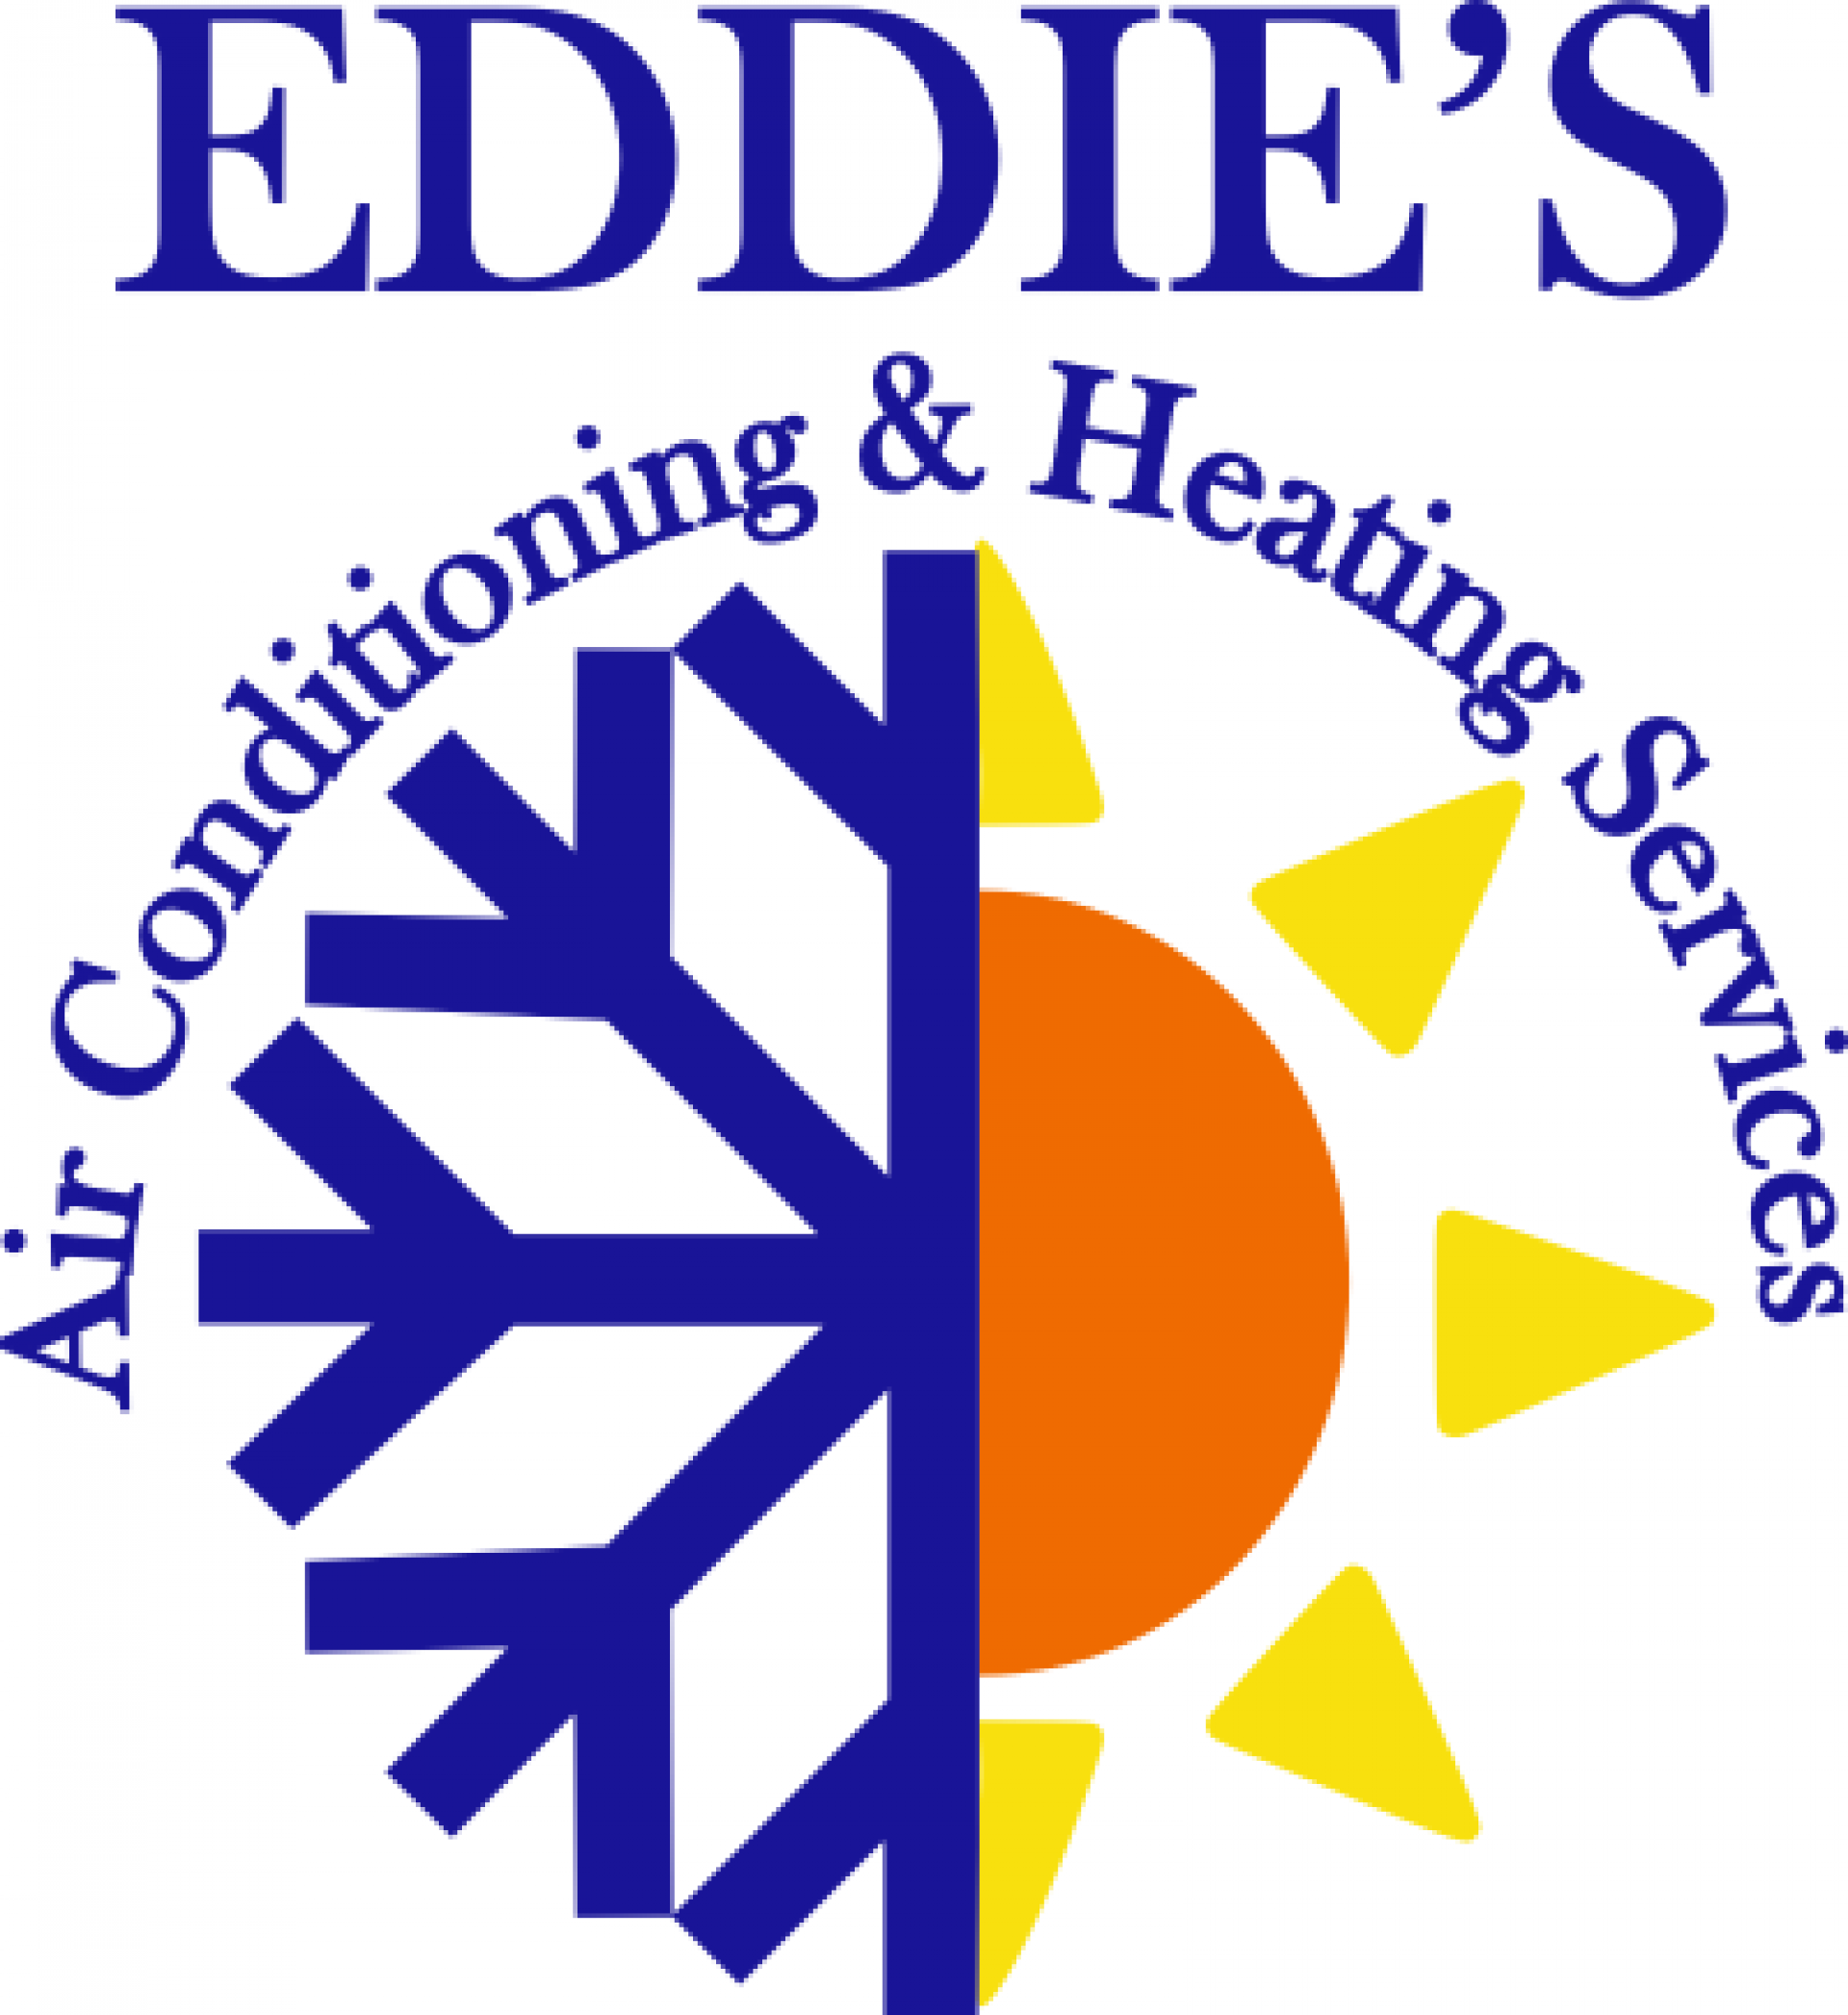 Eddie's Air Conditioning and Heating Services company logo